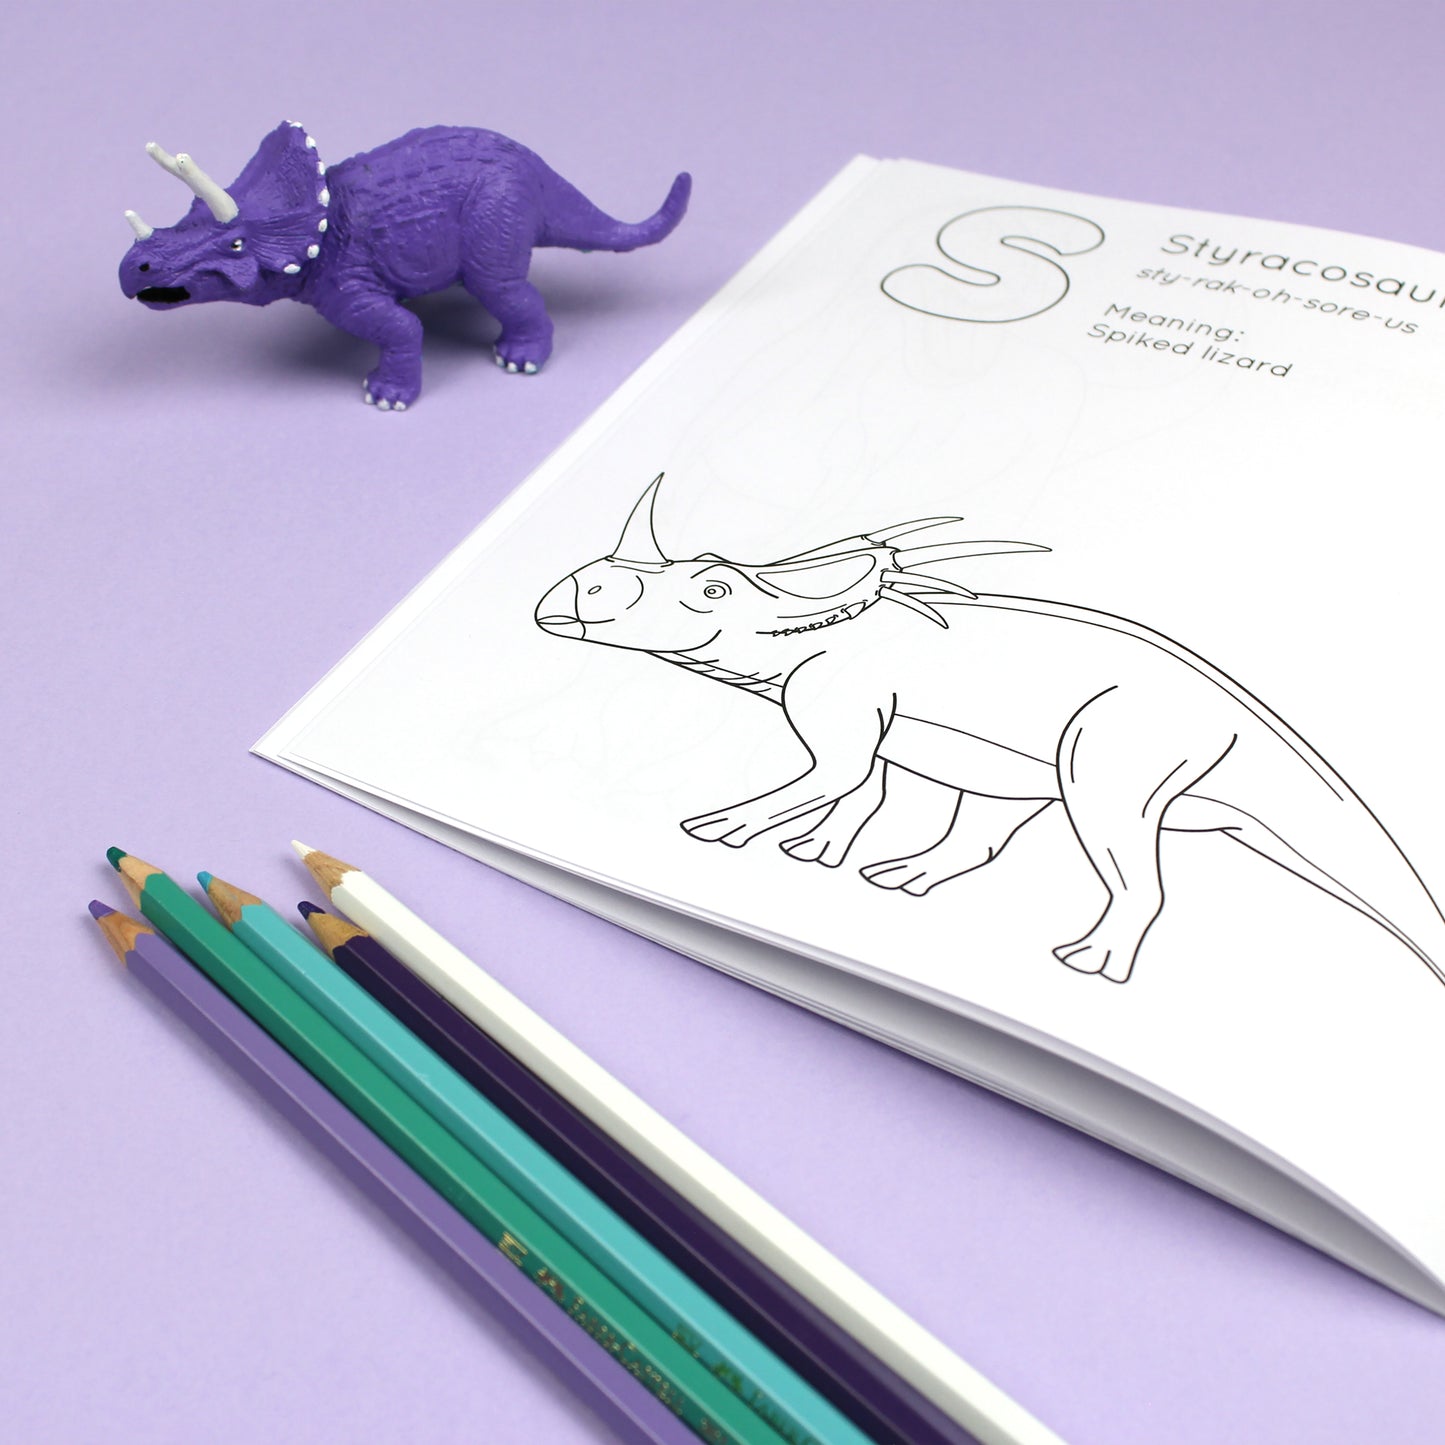 Inside page of ABC Dinosaur colouring book. The page features black line illustration of a Styracosaurus dinosaur with its name, pronunciation and meaning above it.